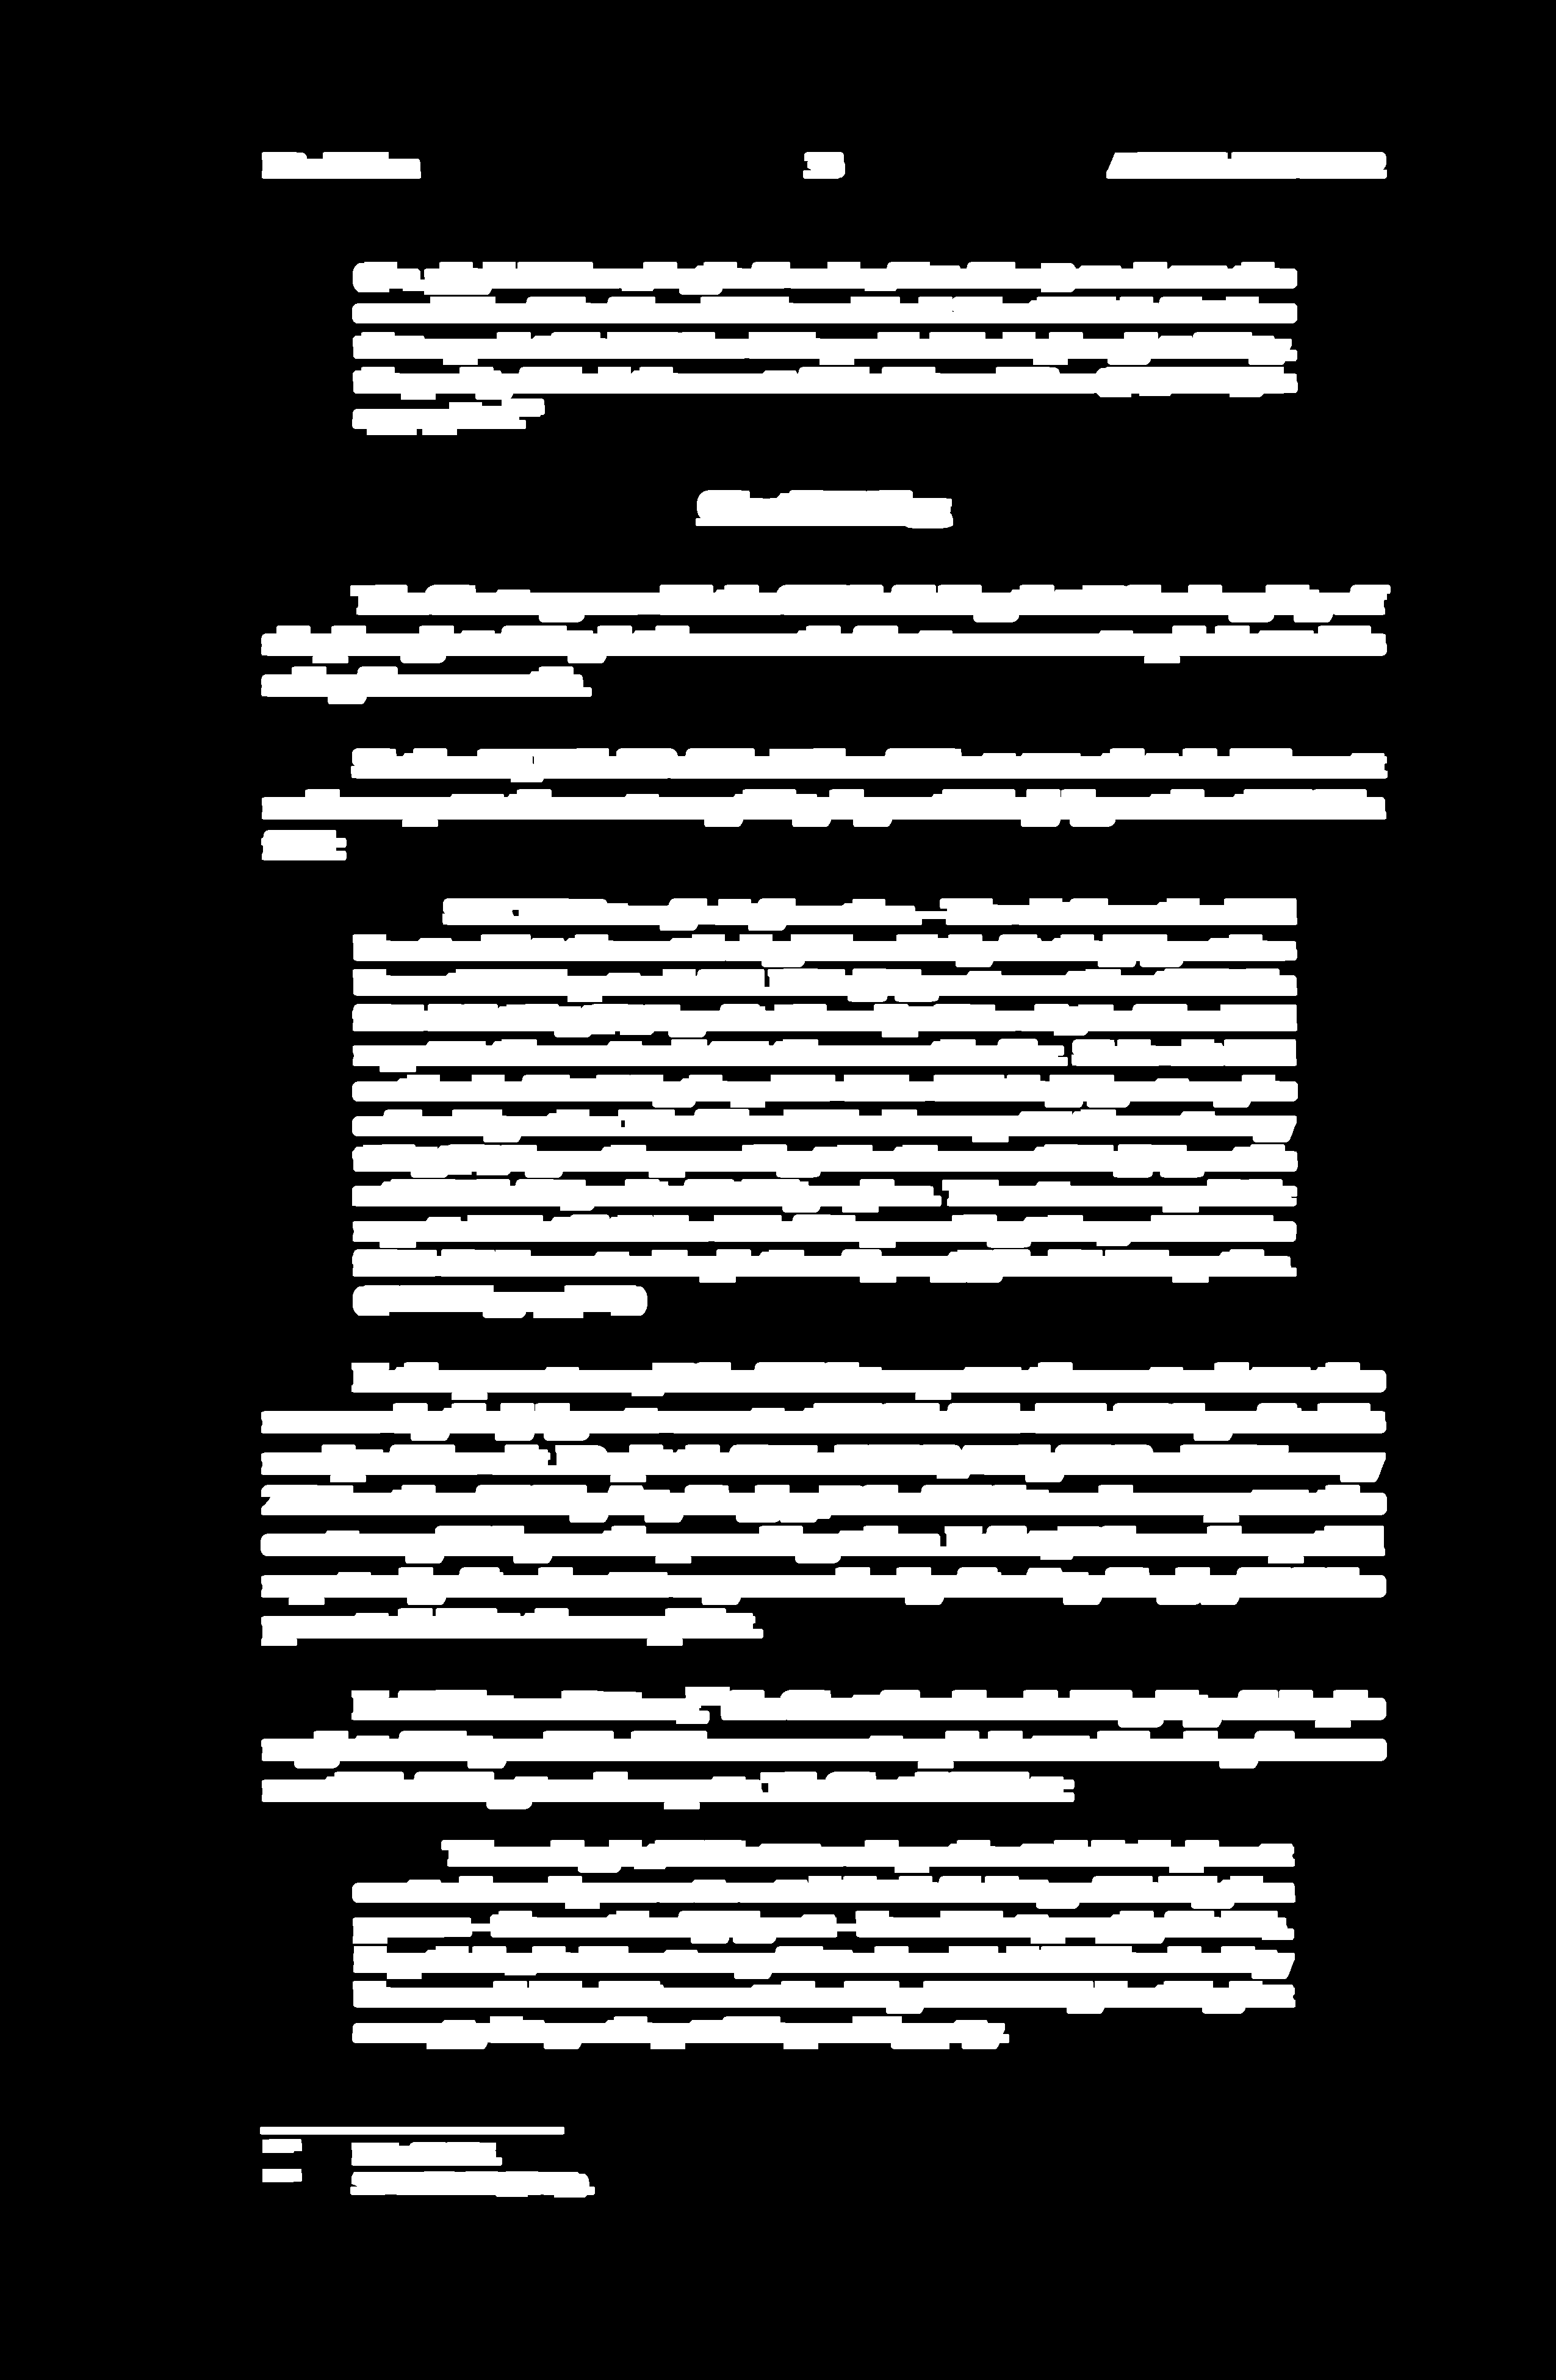 A page of a Supreme Court decision after running opencv commands to dilate the image